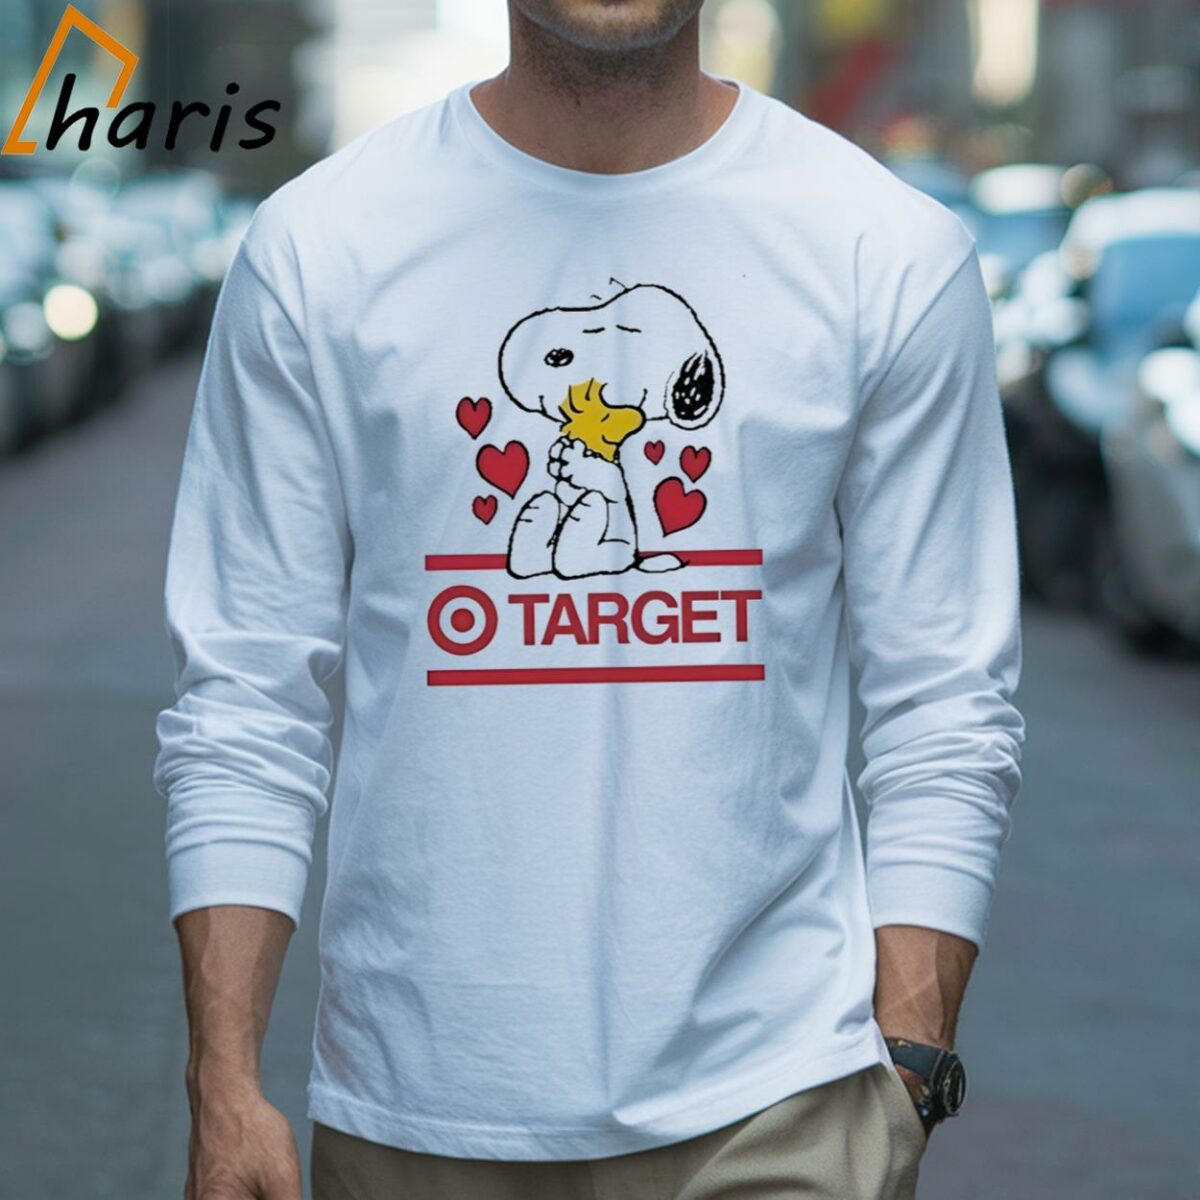 Snoopy And Woodstock Loves Target Logo T shirt 3 Long sleeve shirt